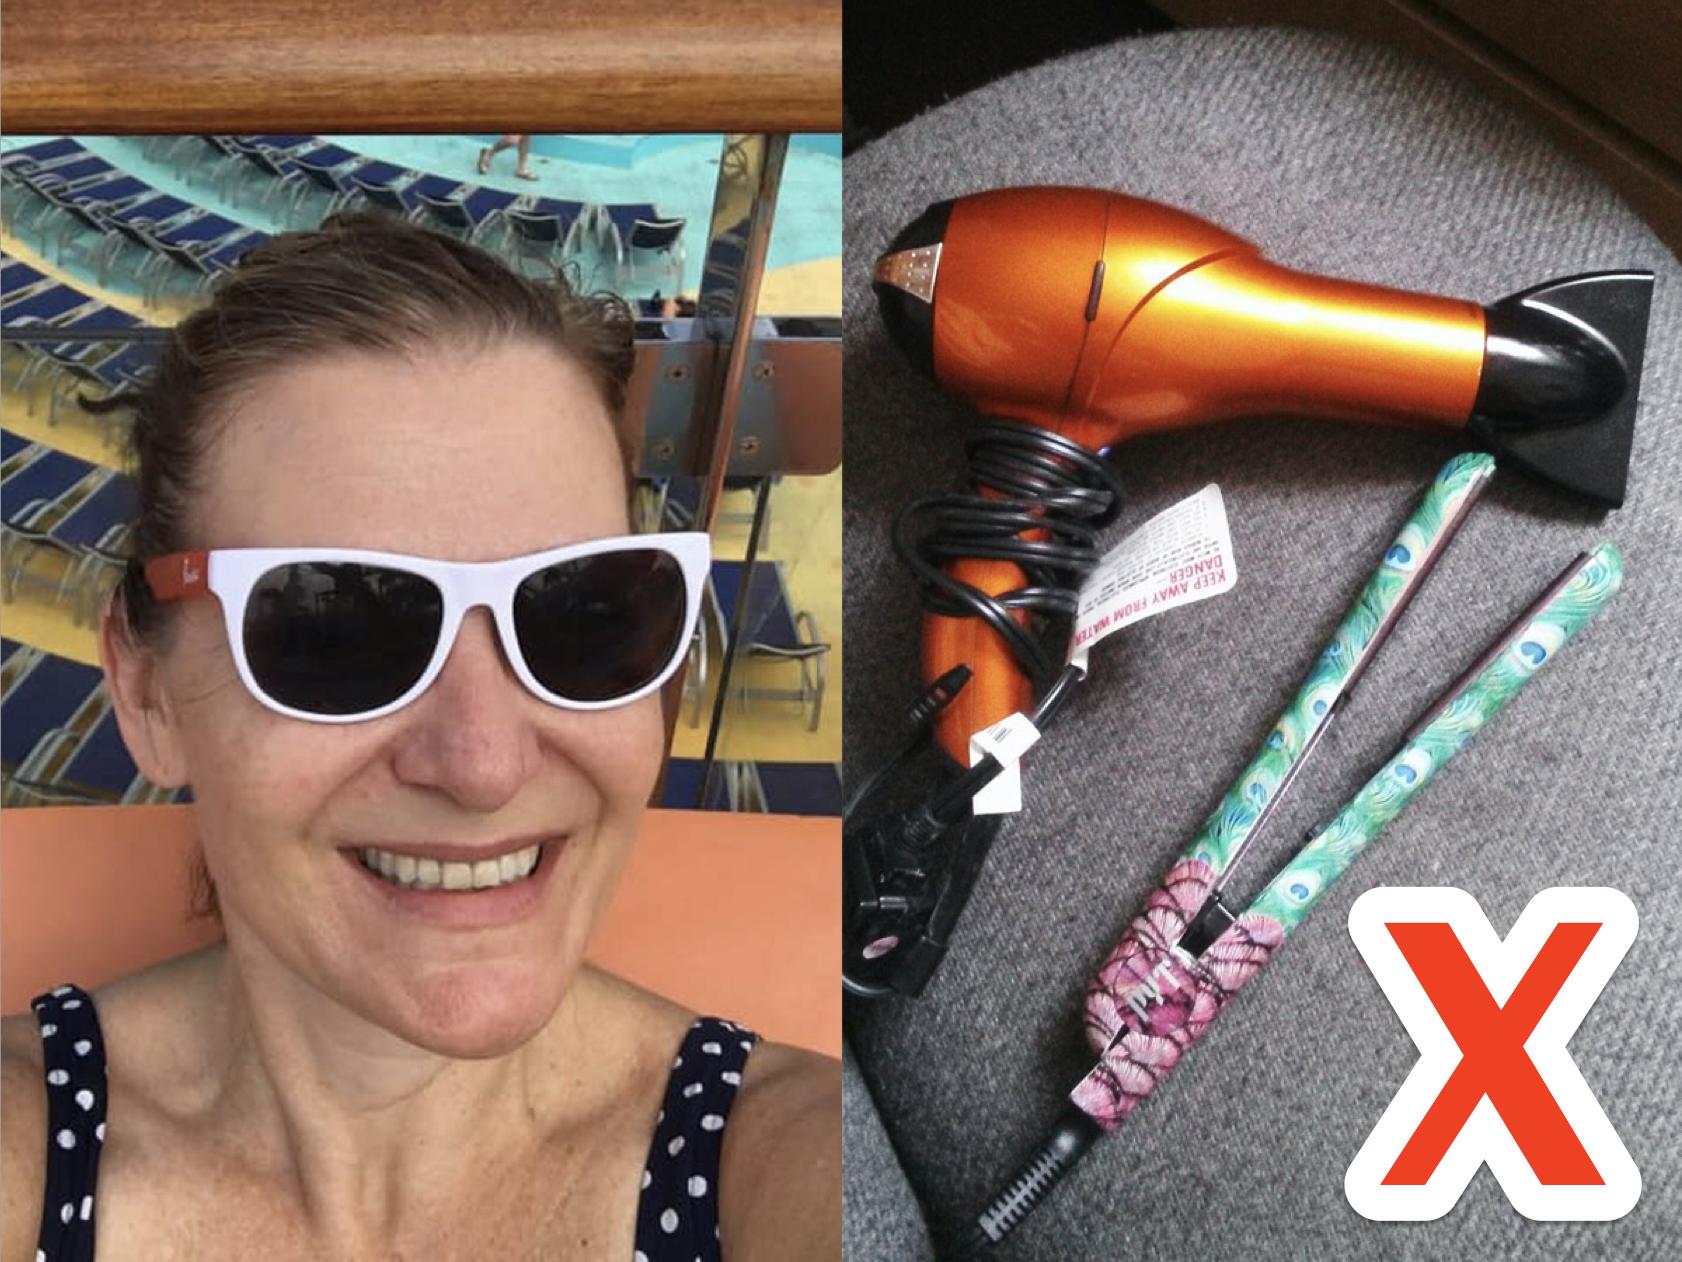 On the left, selfie of the writer on a cruise ship. On the right, a hair dryer and straightener beside a red X.